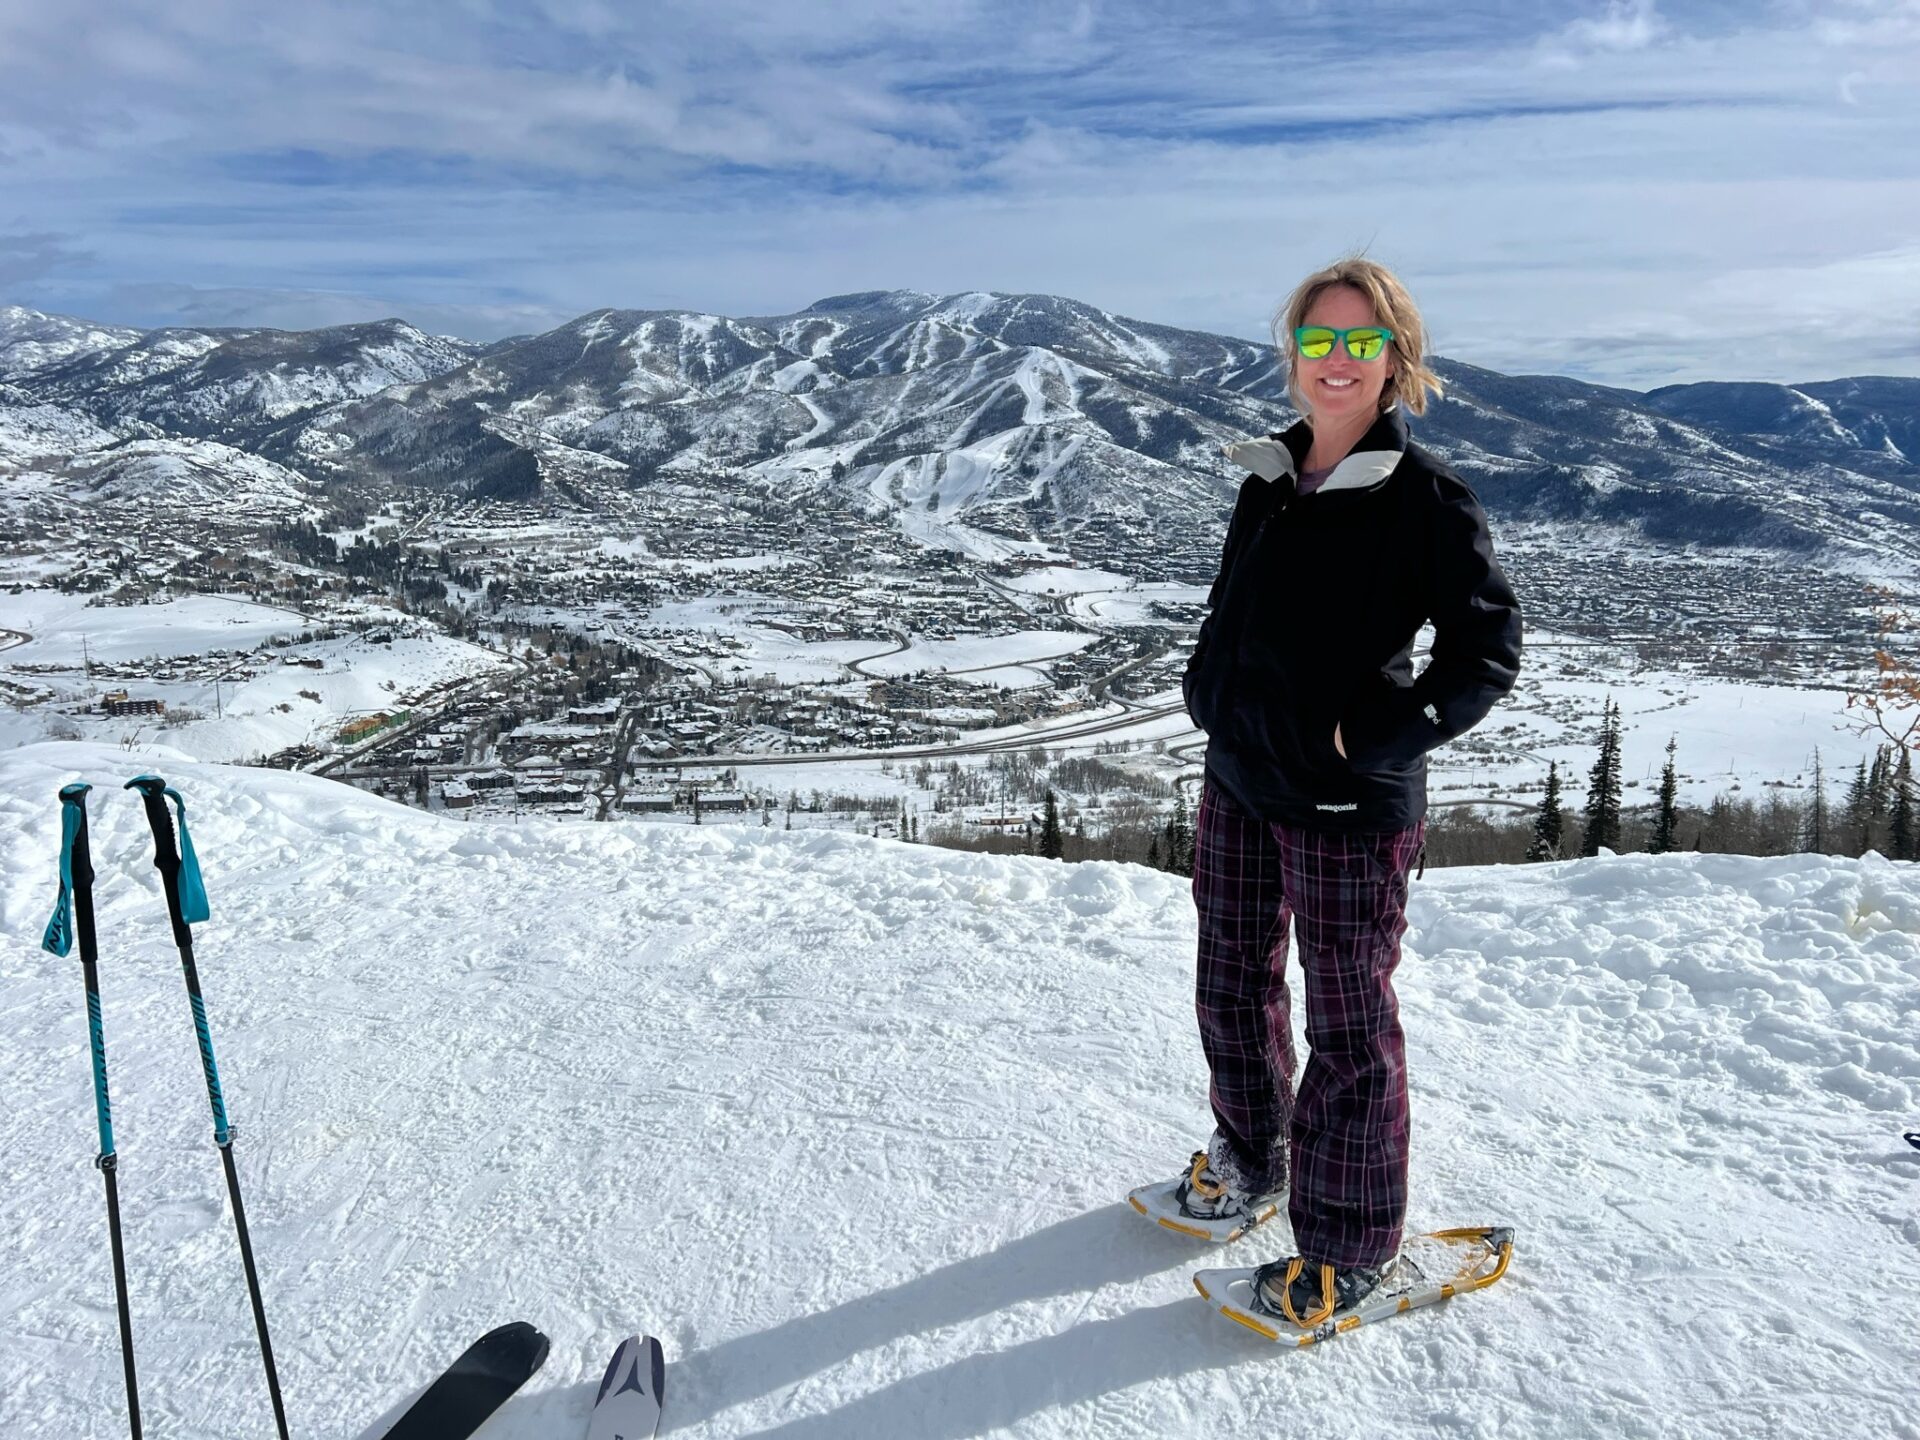 Things to do in Steamboat Springs, CO in the Winter (& Tips to Ski Steamboat Springs)